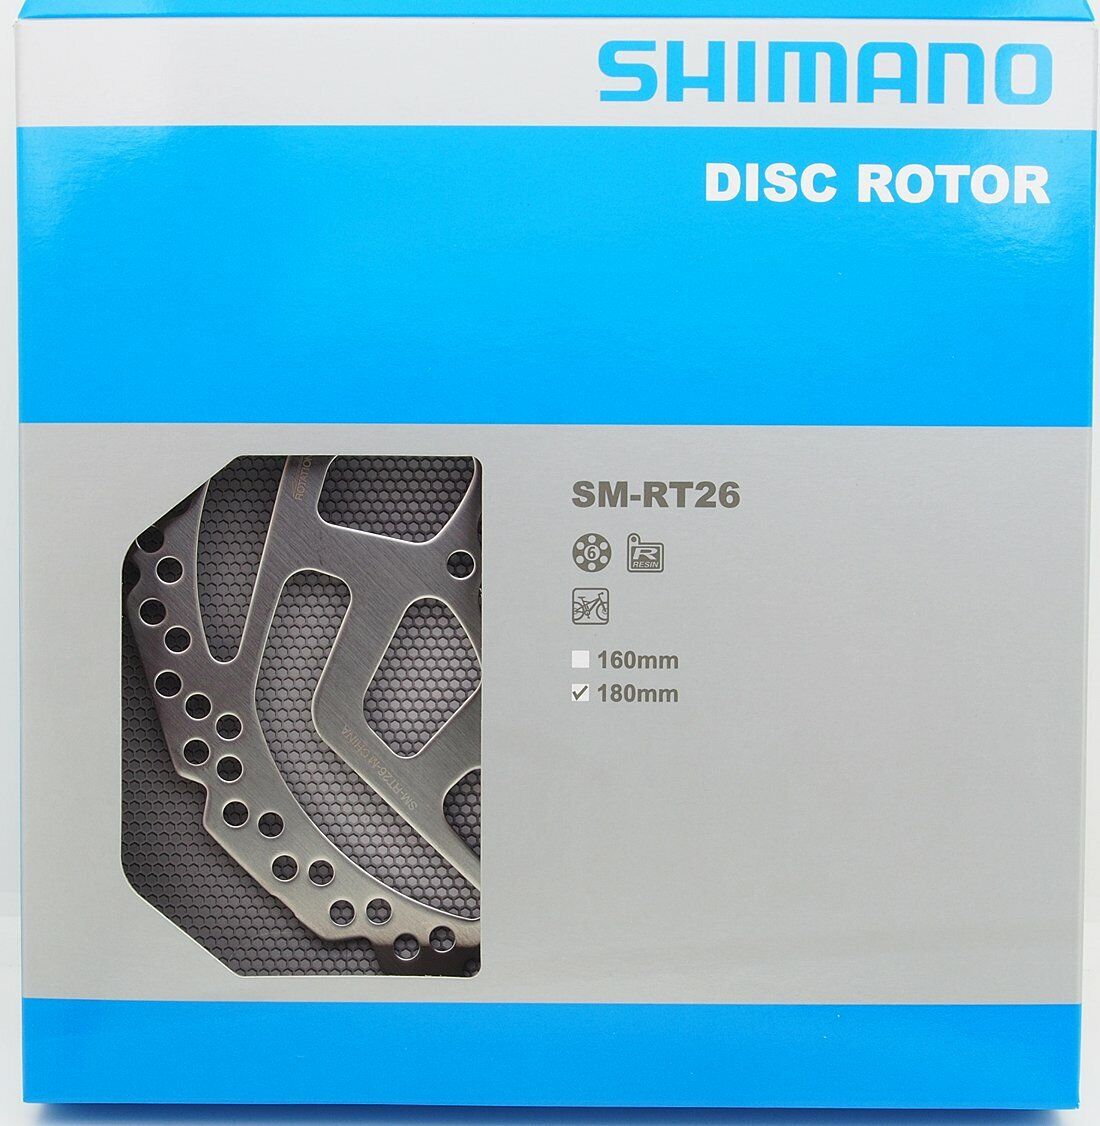 Shimano SM-RT26 6 bolt disc rotor for resin pads